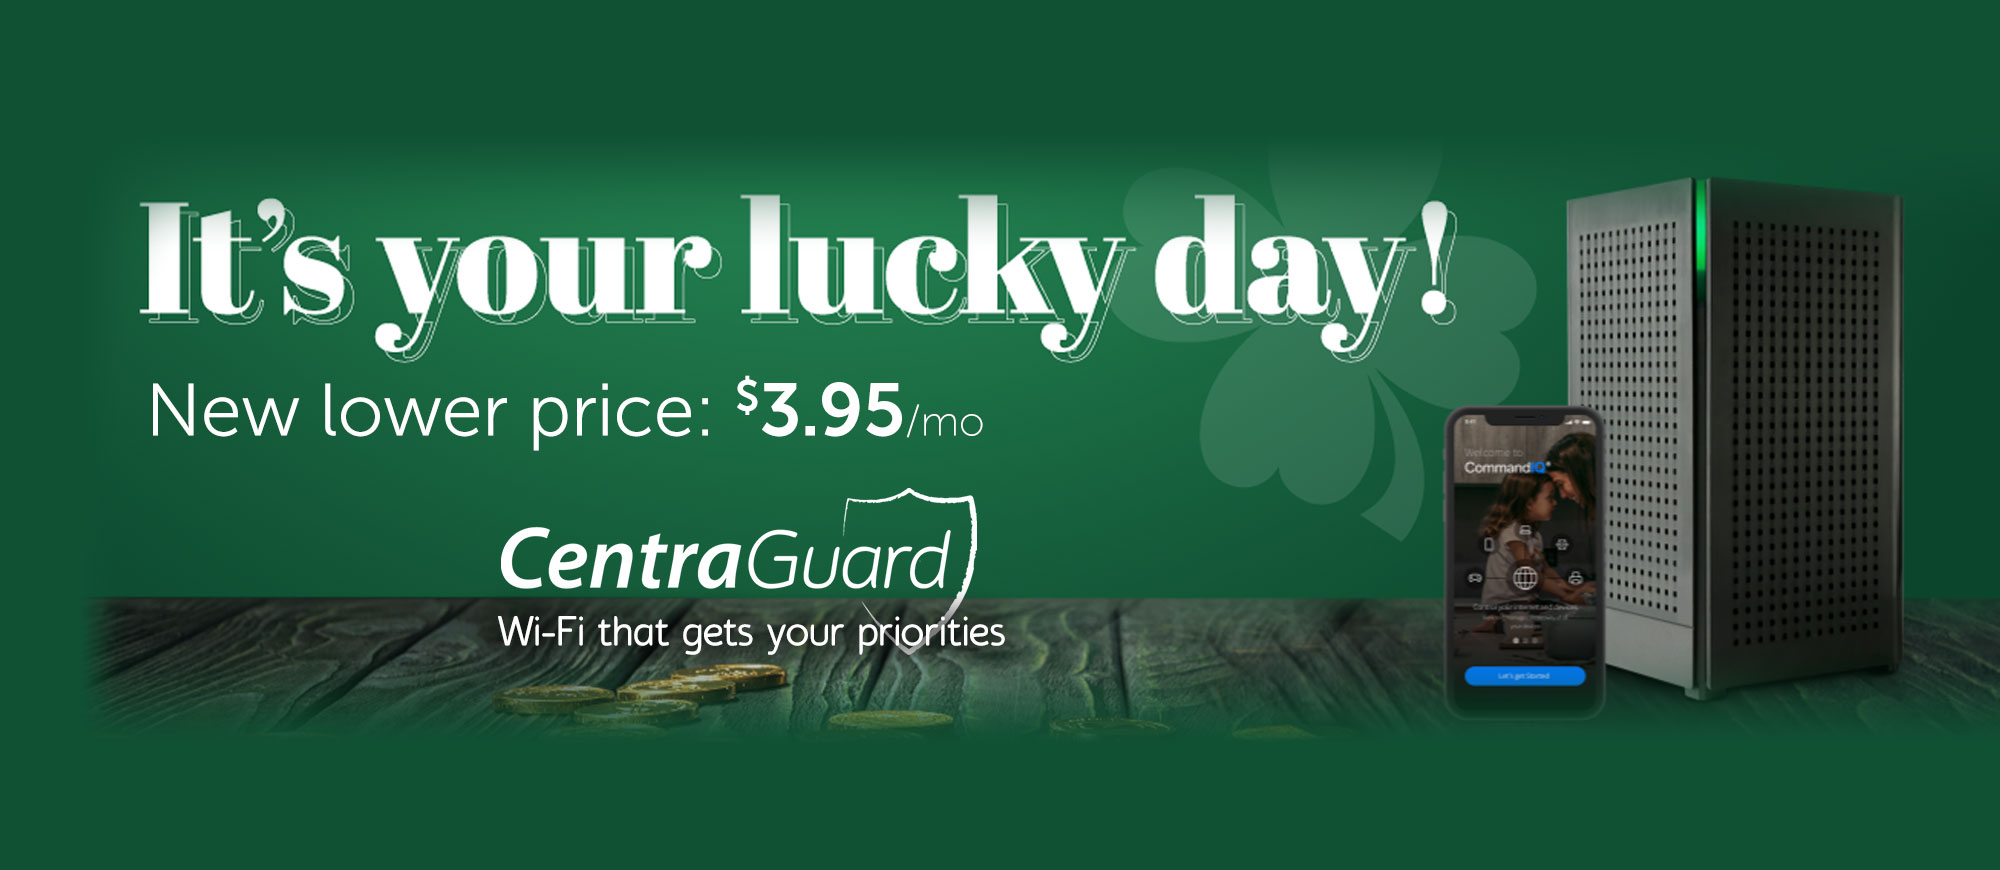 New lower price for CentraGuard